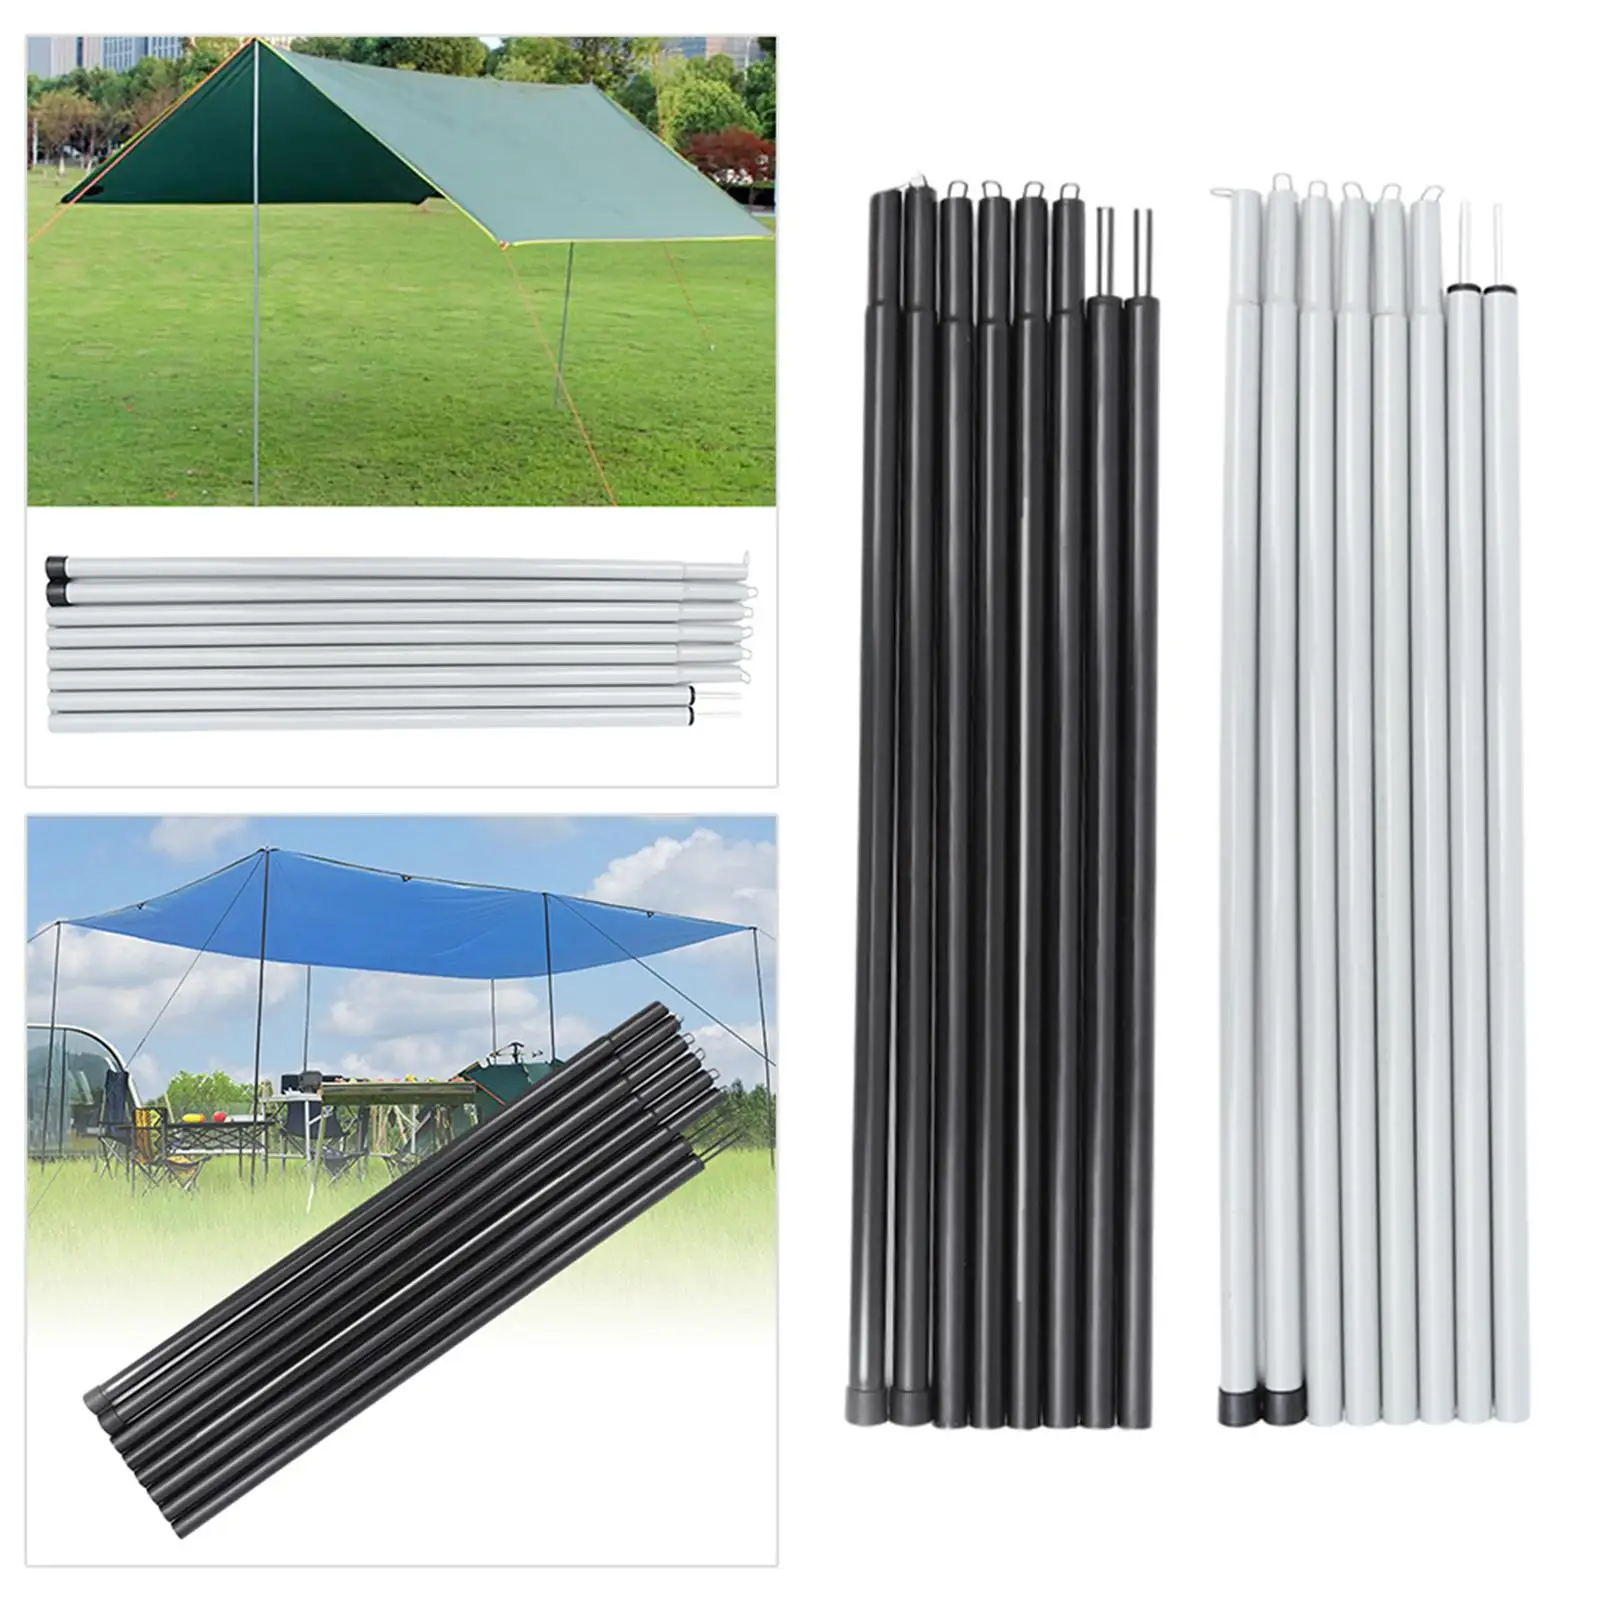 Tent Support Rod Folding Tent Poles Bars for Backpacking Awning